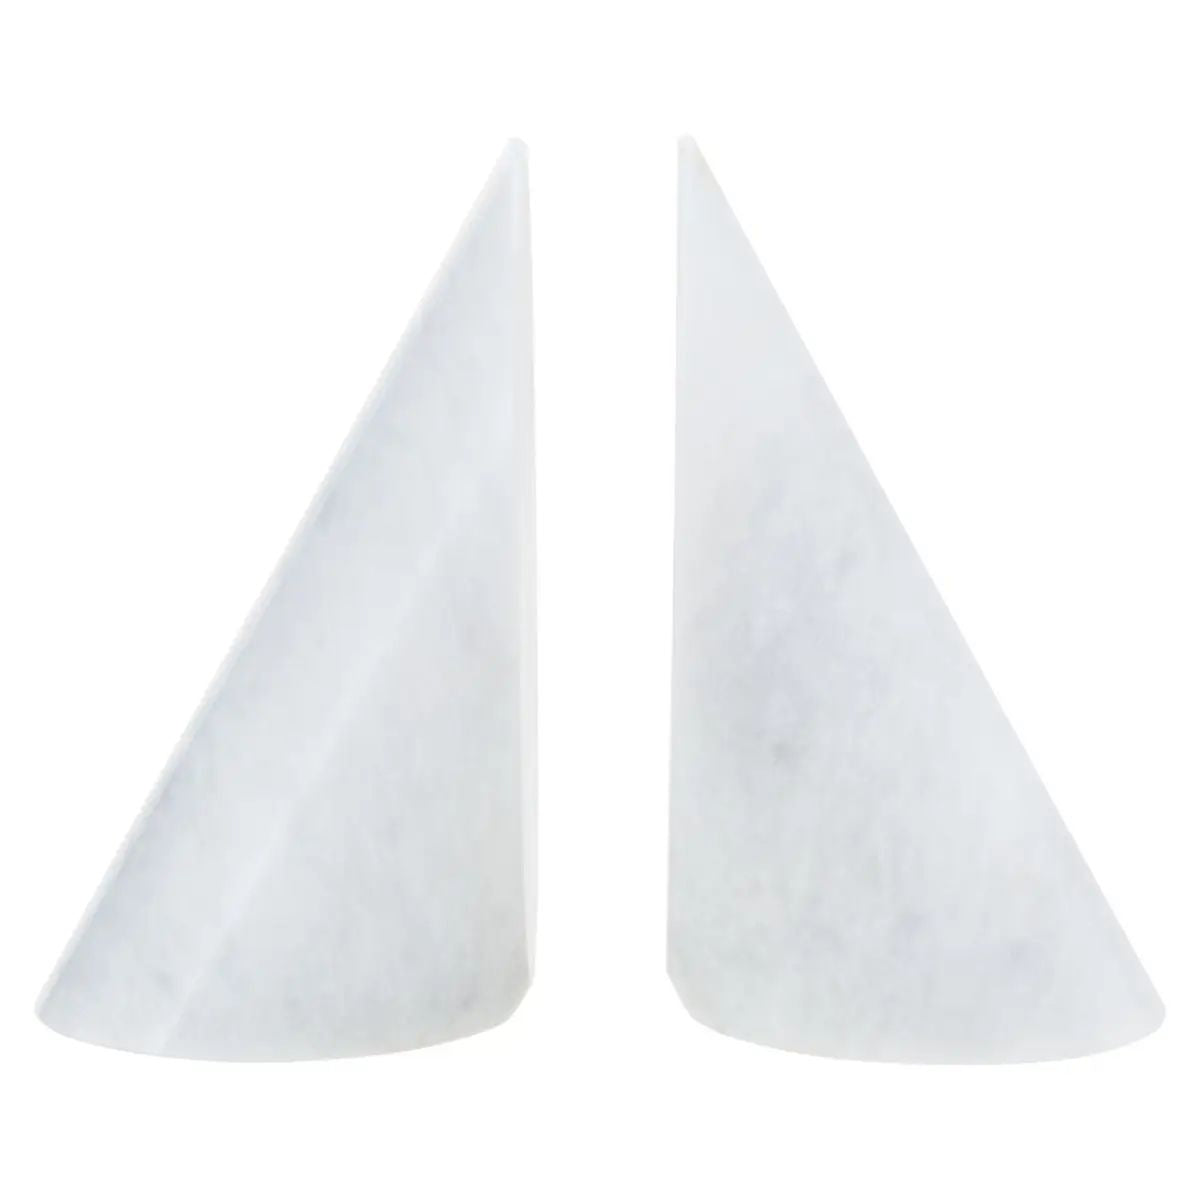 Marmo Set of 2 White Marble Bookends